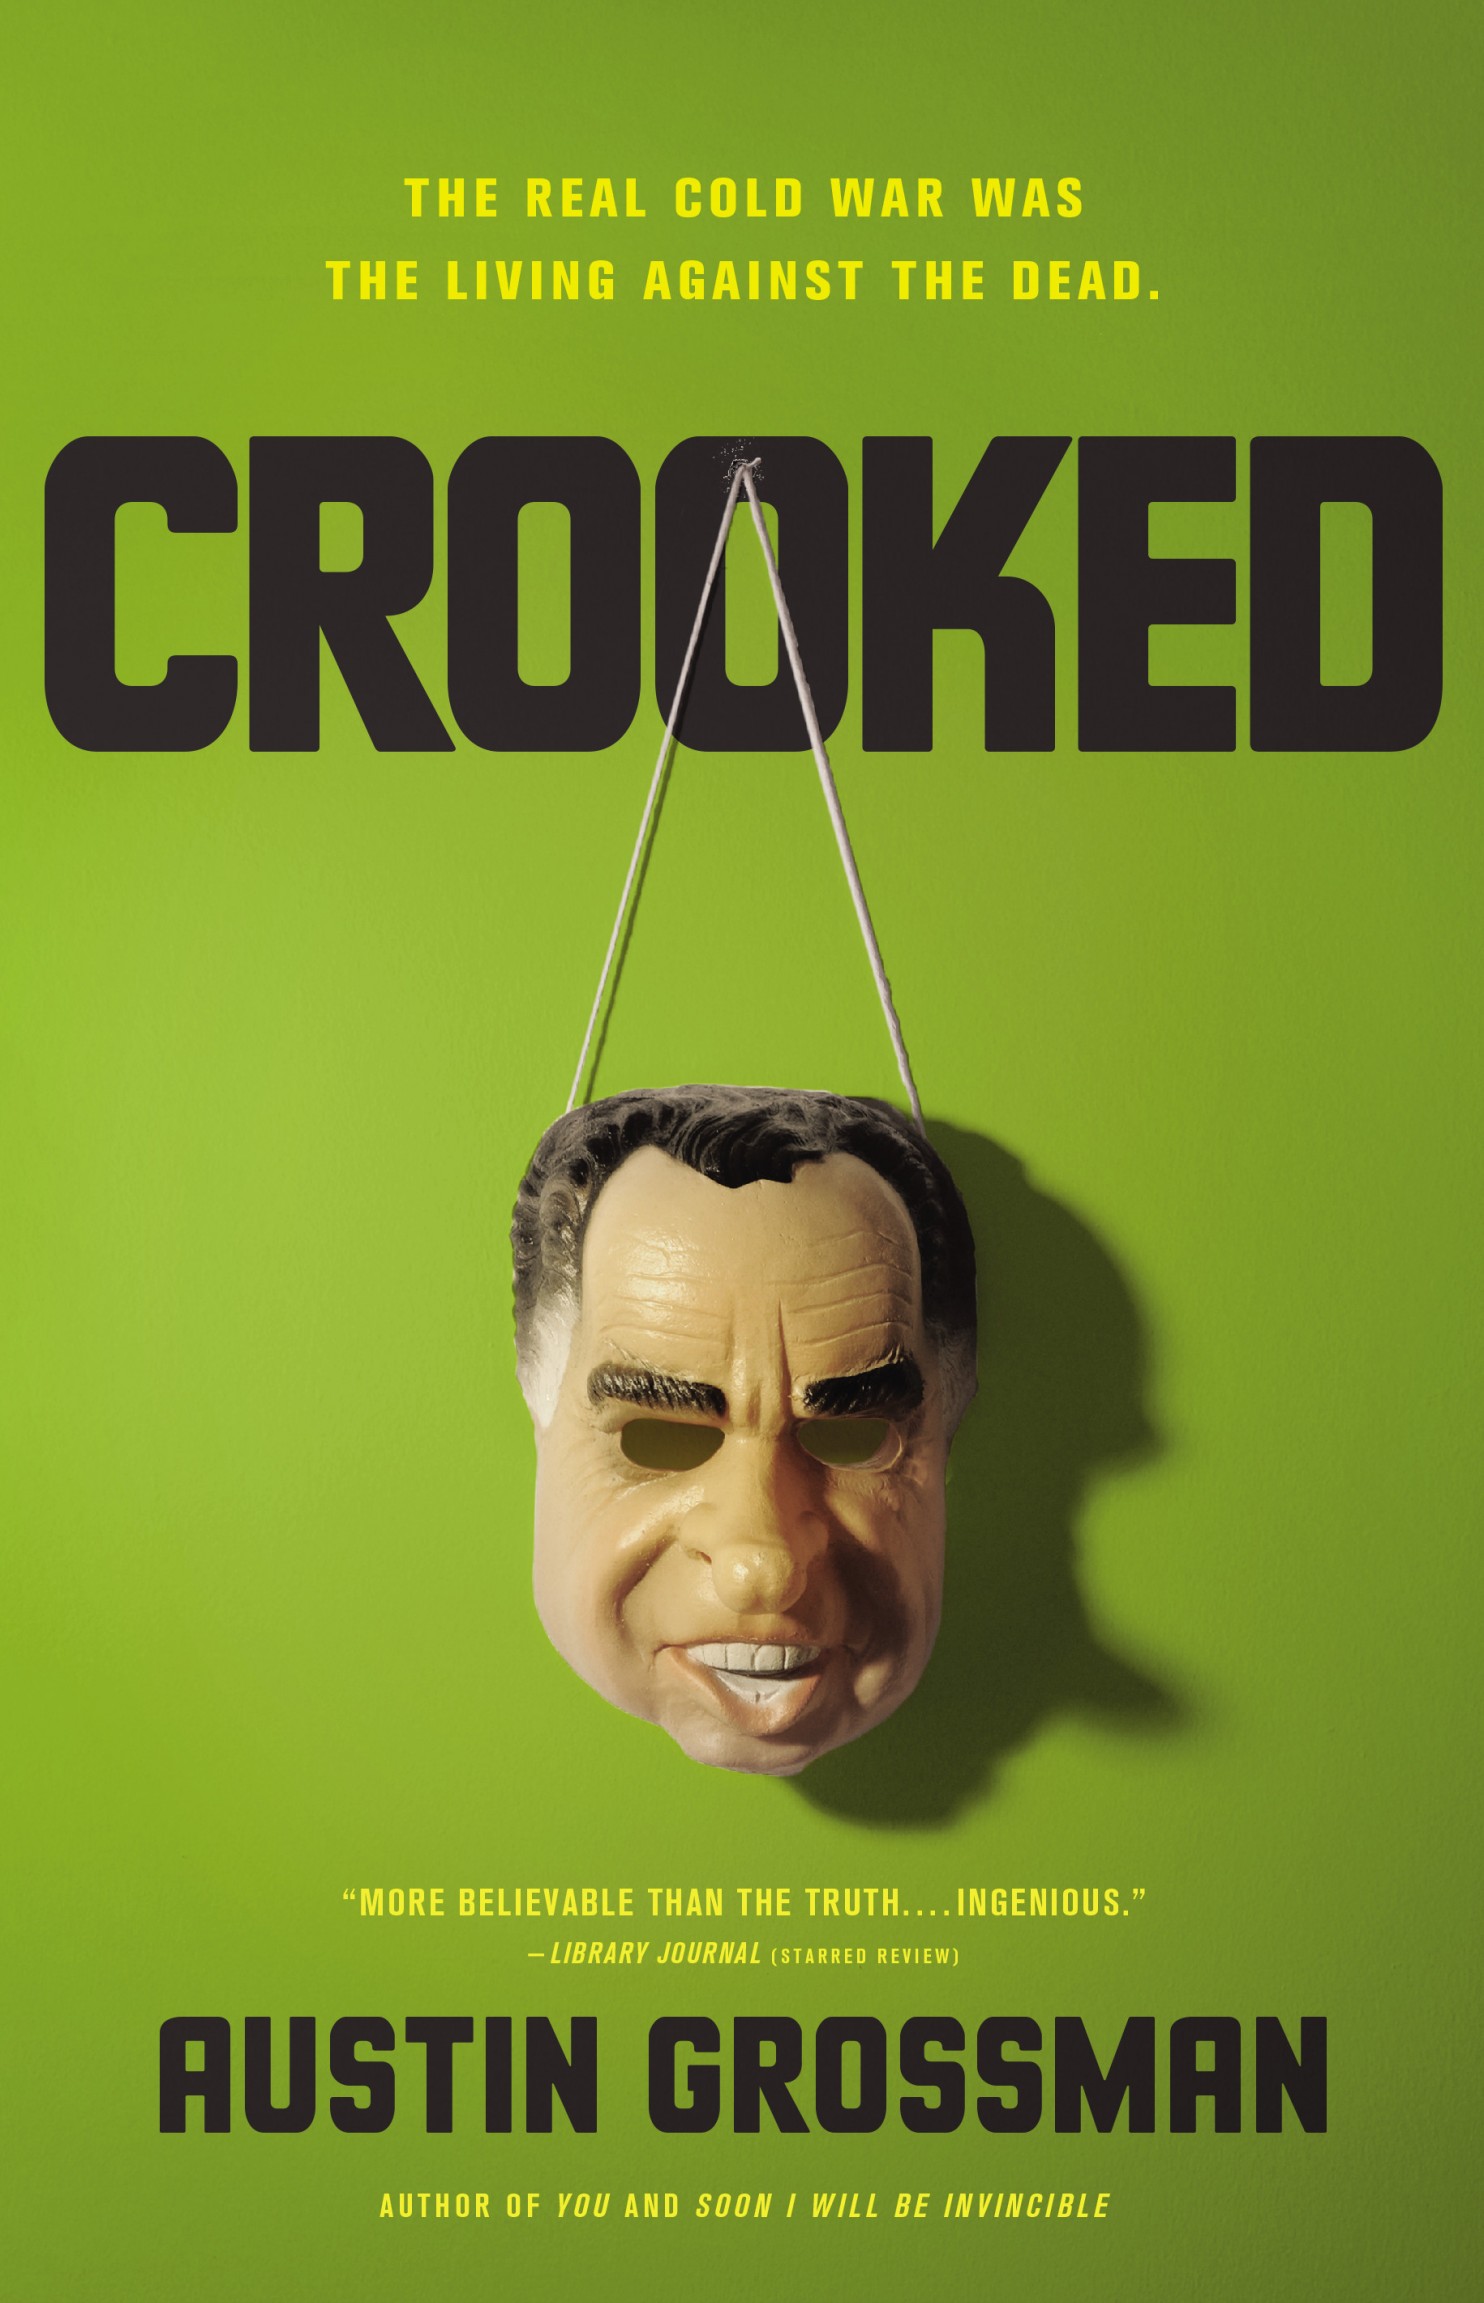 Friday Reads: Crooked by Austin Grossman